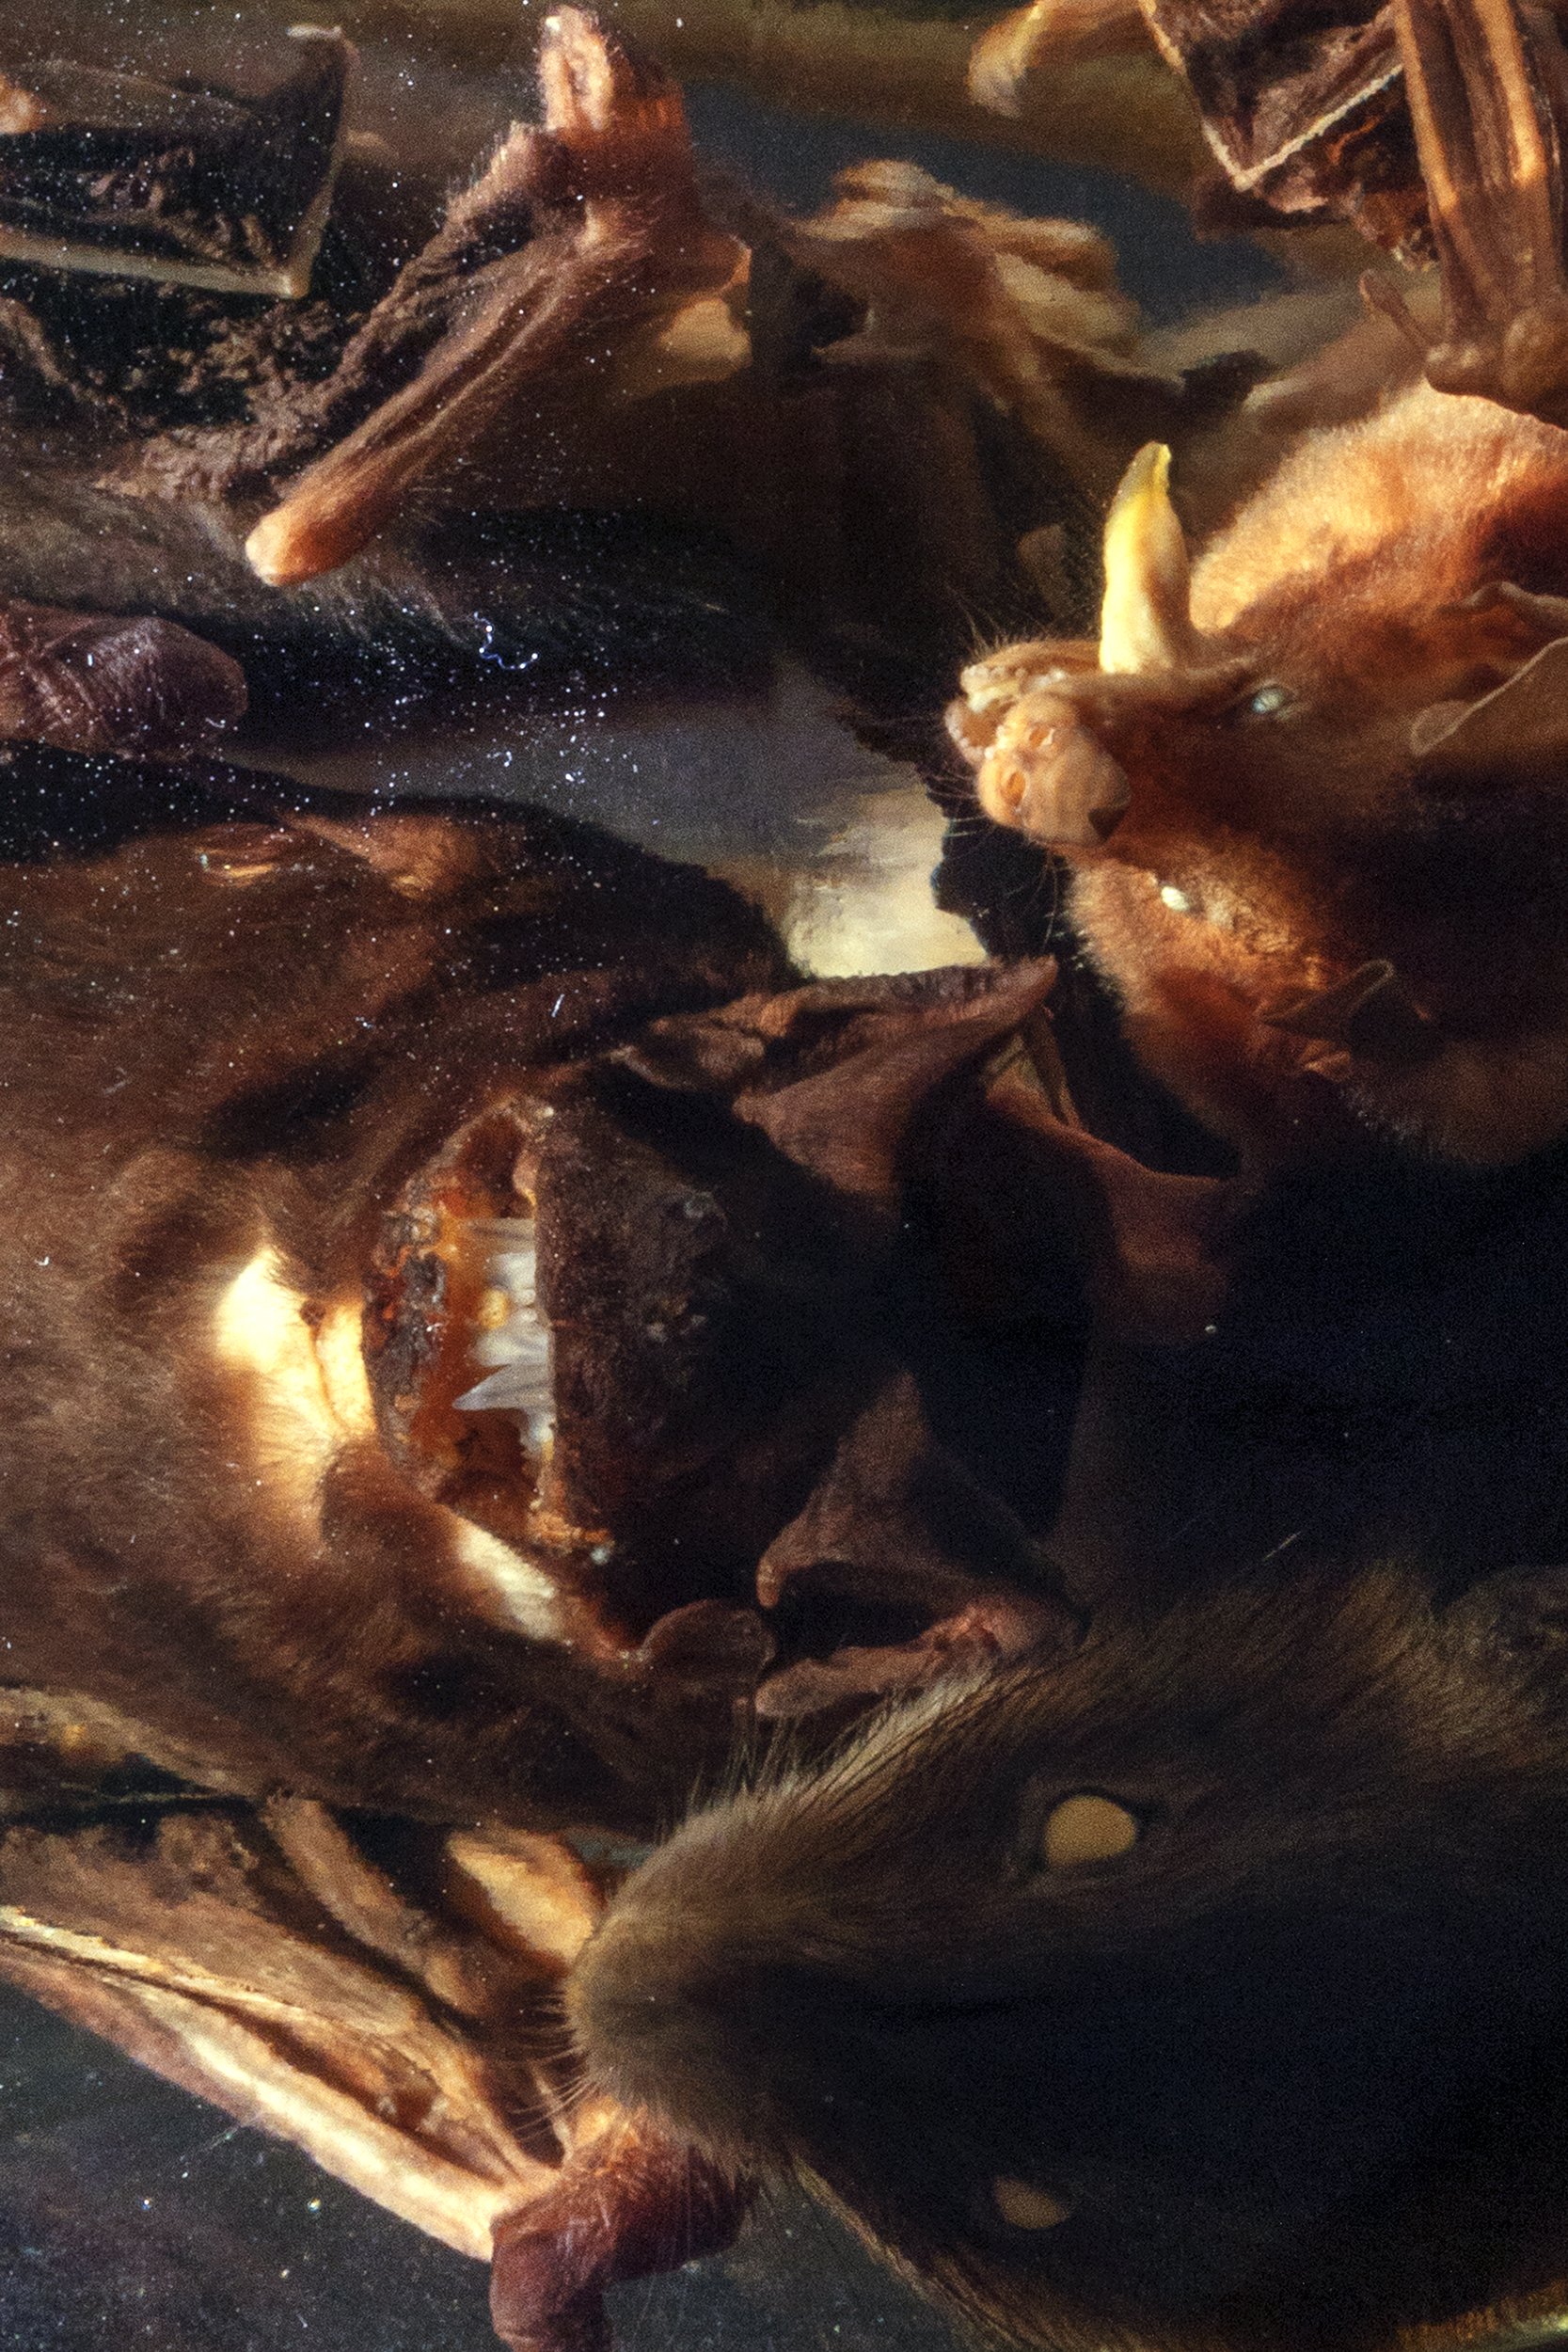  Vampire Bats and Pale spear-nosed bats are preserved in an alcoholic solution in the Ciudad Blanca Laboratory. Olancho Department, Honduras.  Bats are fundamental in the tropics. They disperse seeds that are critical to restoring cleared or damaged 